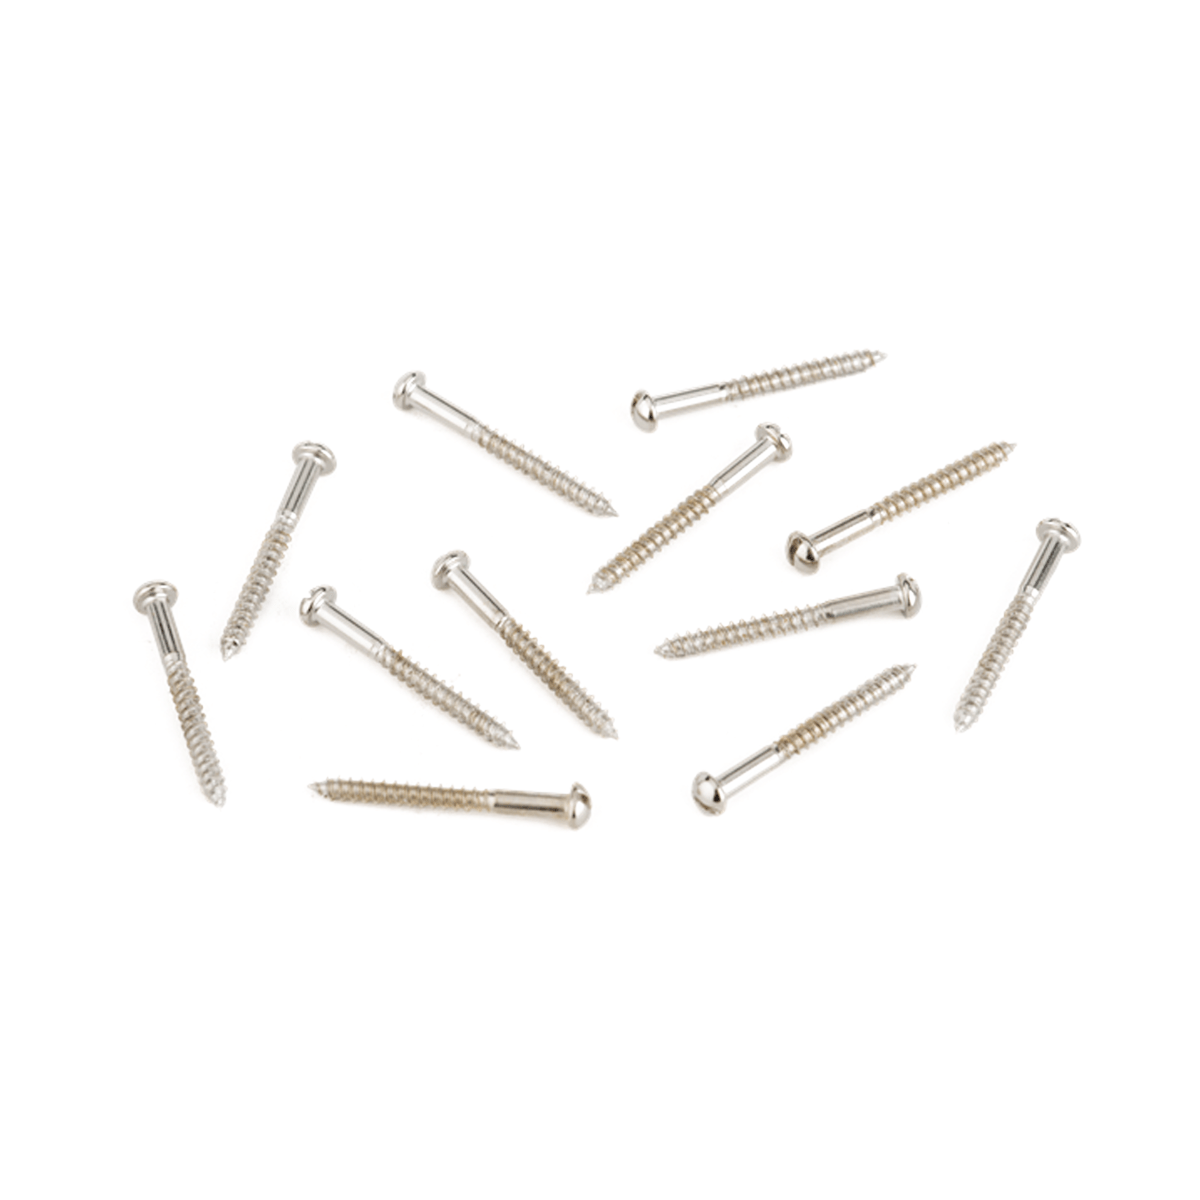 Fender Home Page Fender - Pure Vintage Slotted Telecaster Neck Pickup Mounting Screws Nickel (12) - Byron Music